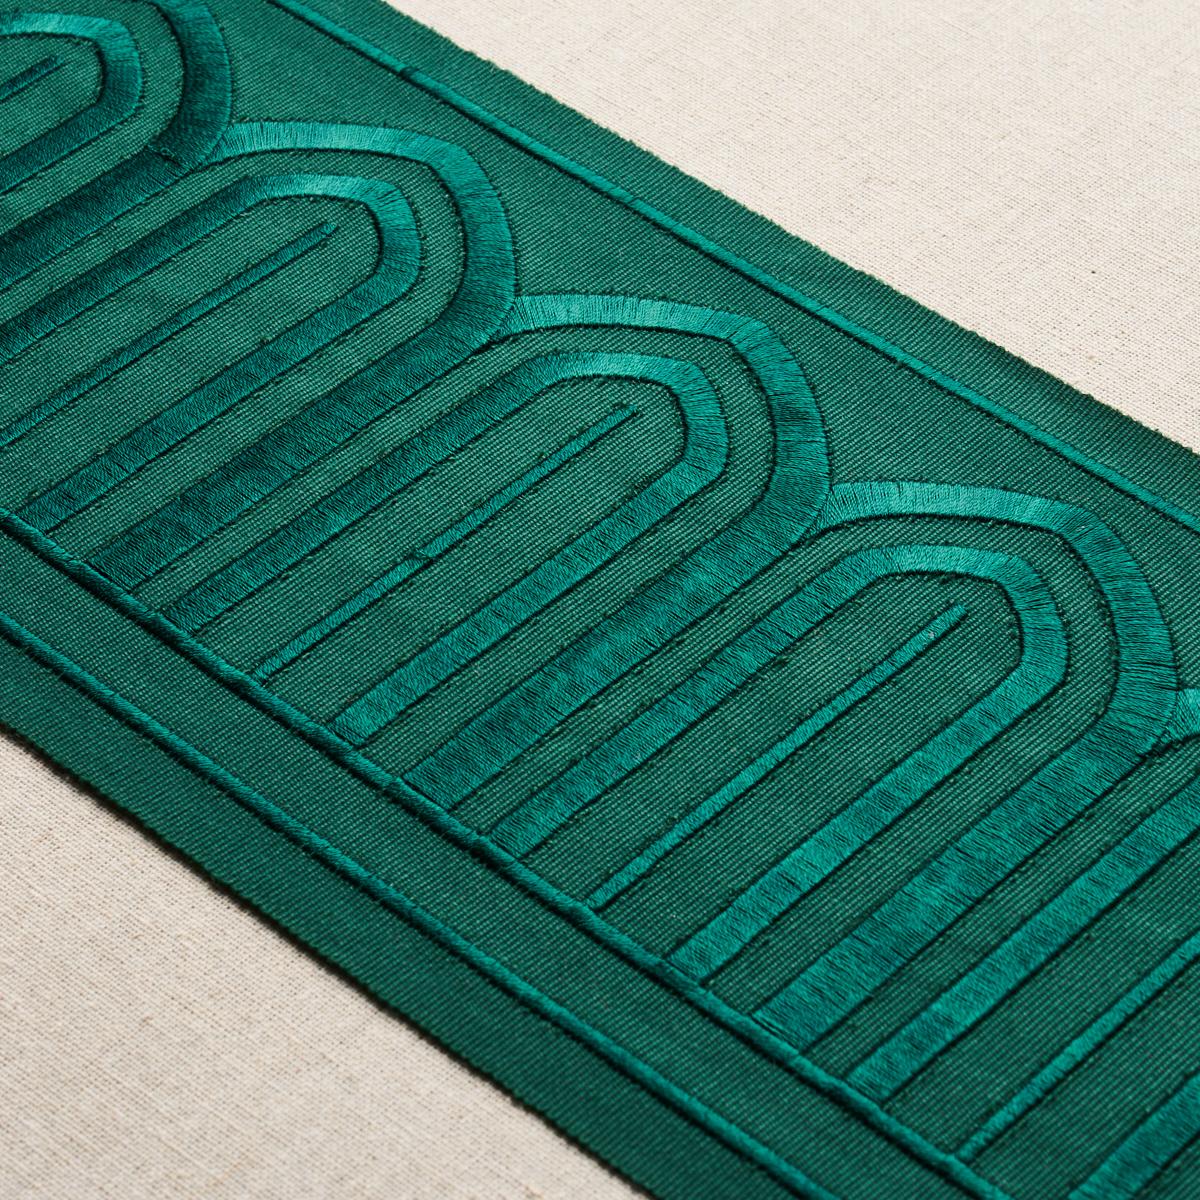 ARCHES EMBROIDERED TAPE WIDE_EMERALD